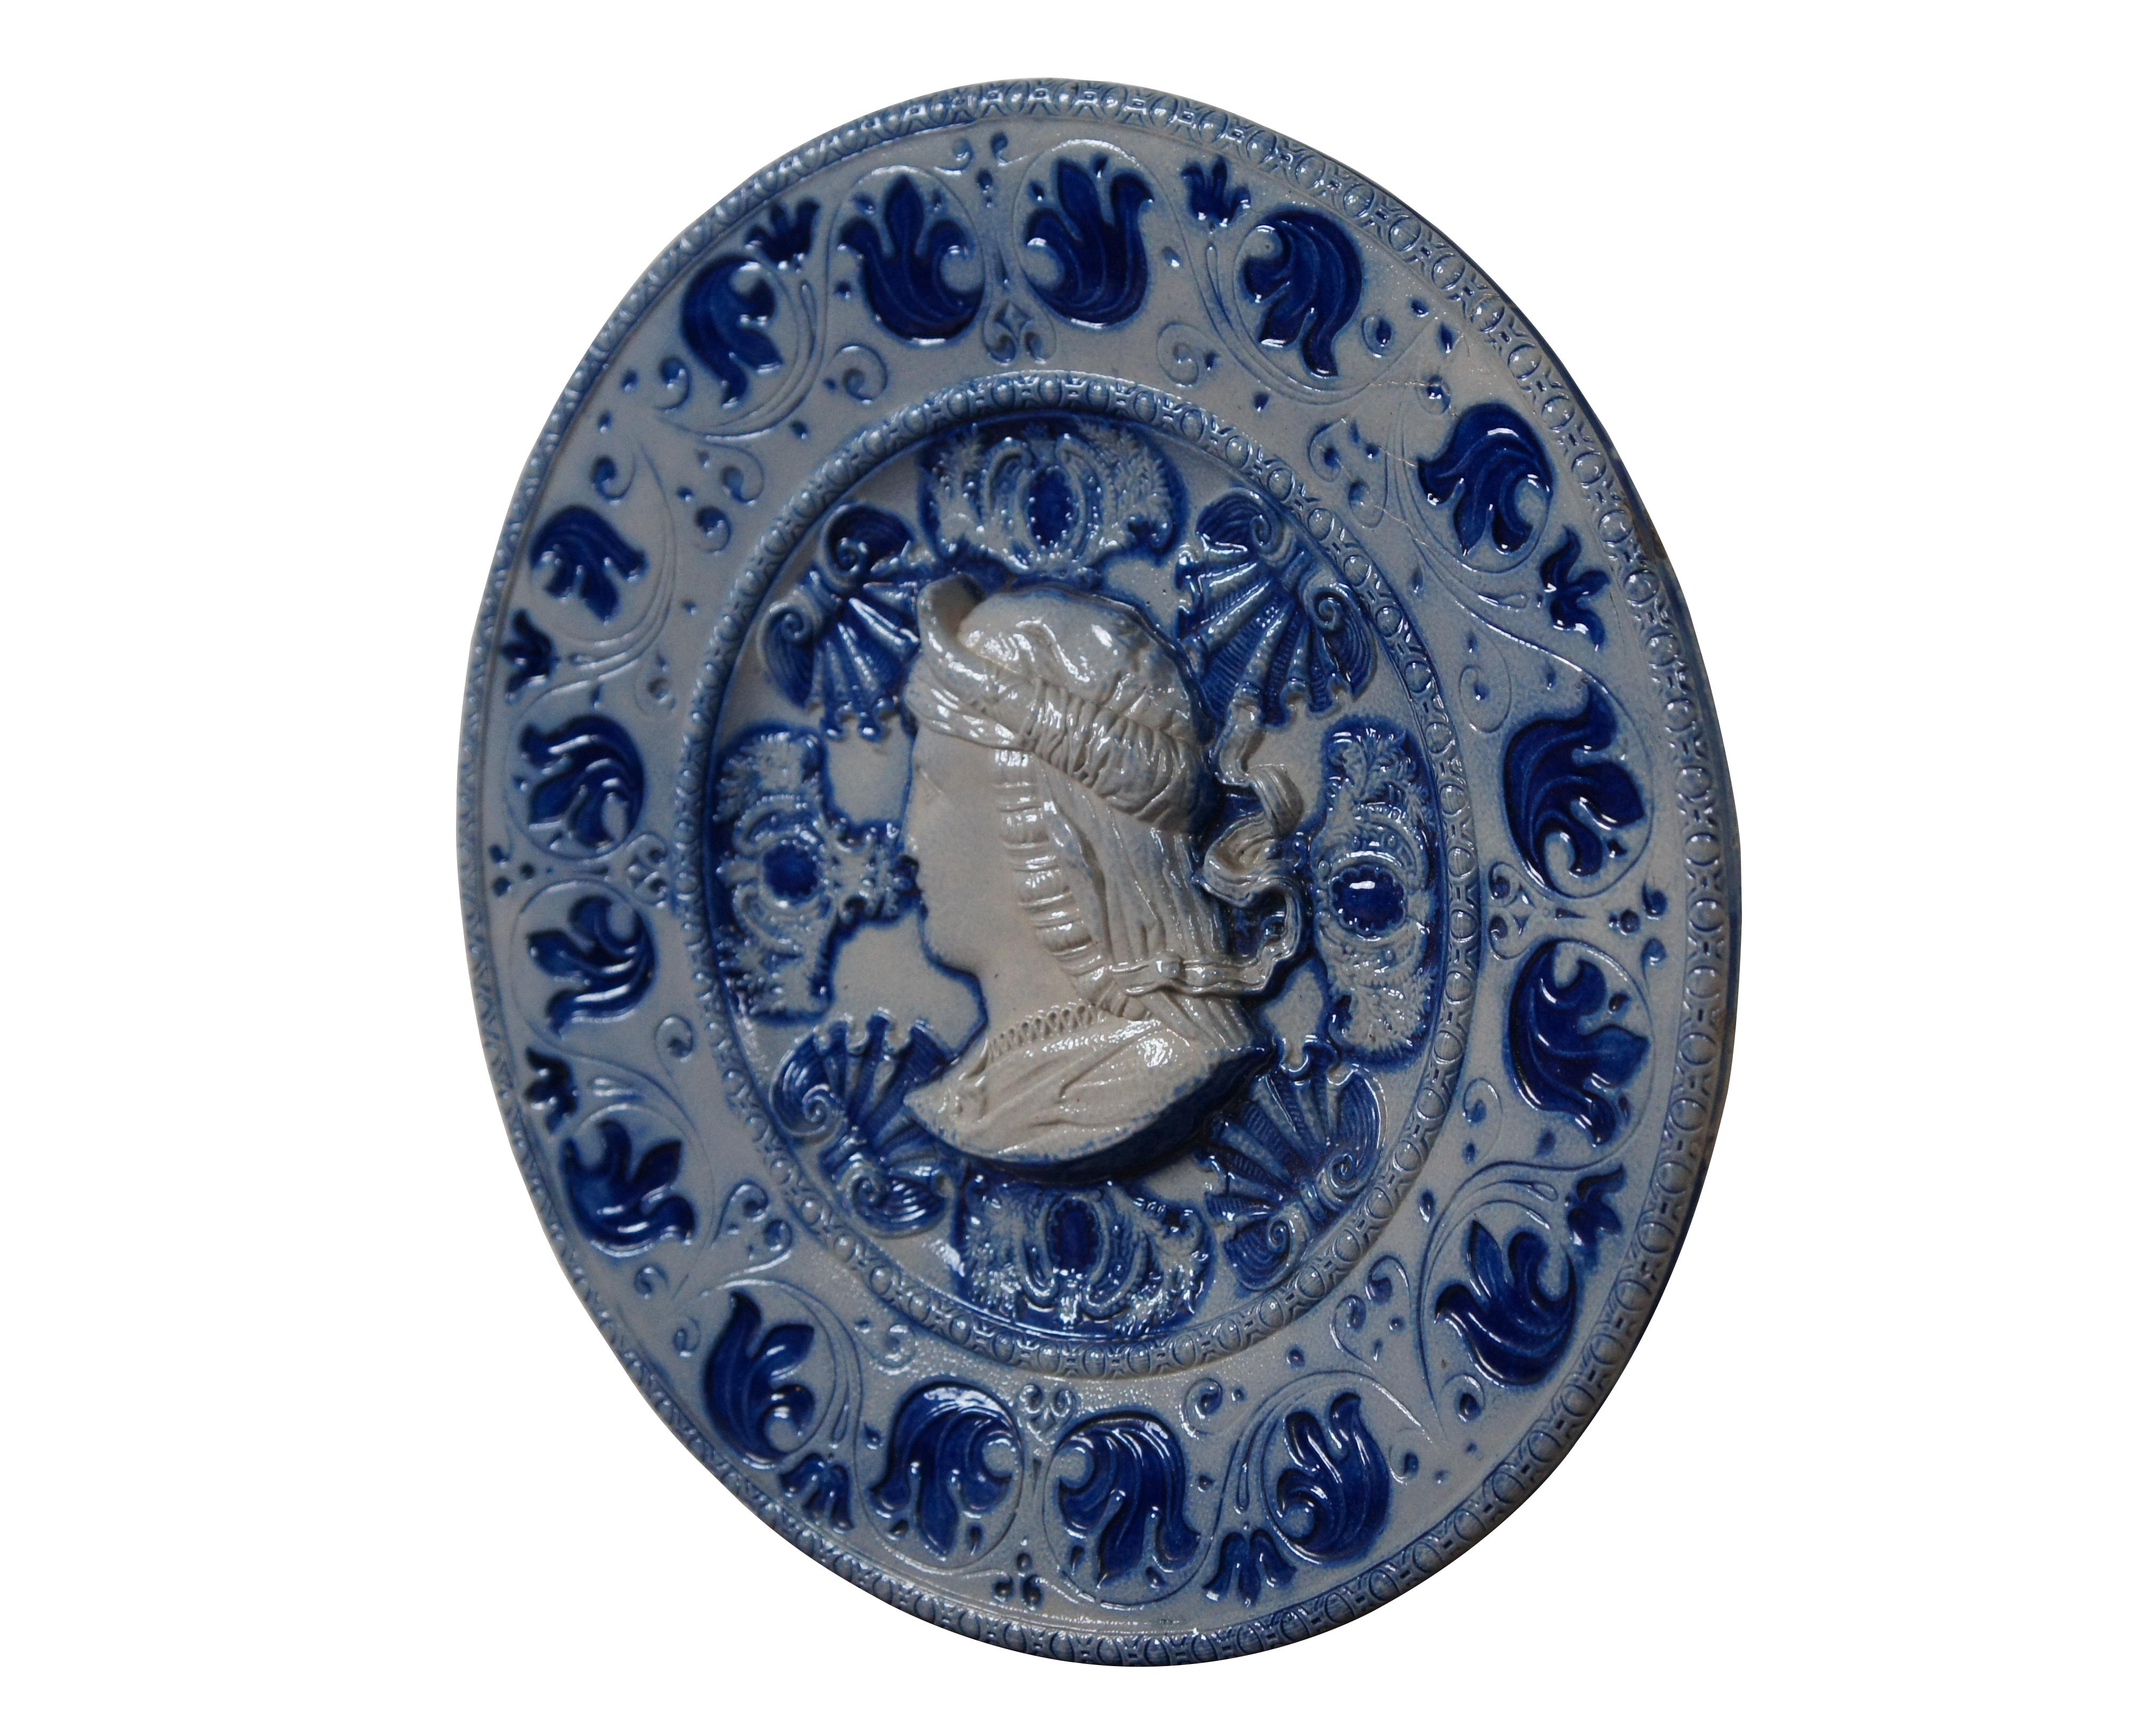 Mid to late 20th century German Westerwald salt glaze and cobalt blue stoneware wall hanging plate / charger featuring a regal looking bust in silhouette, surroundded by scallops and flourishes, within a border of swirling leaves. Marked 145 on